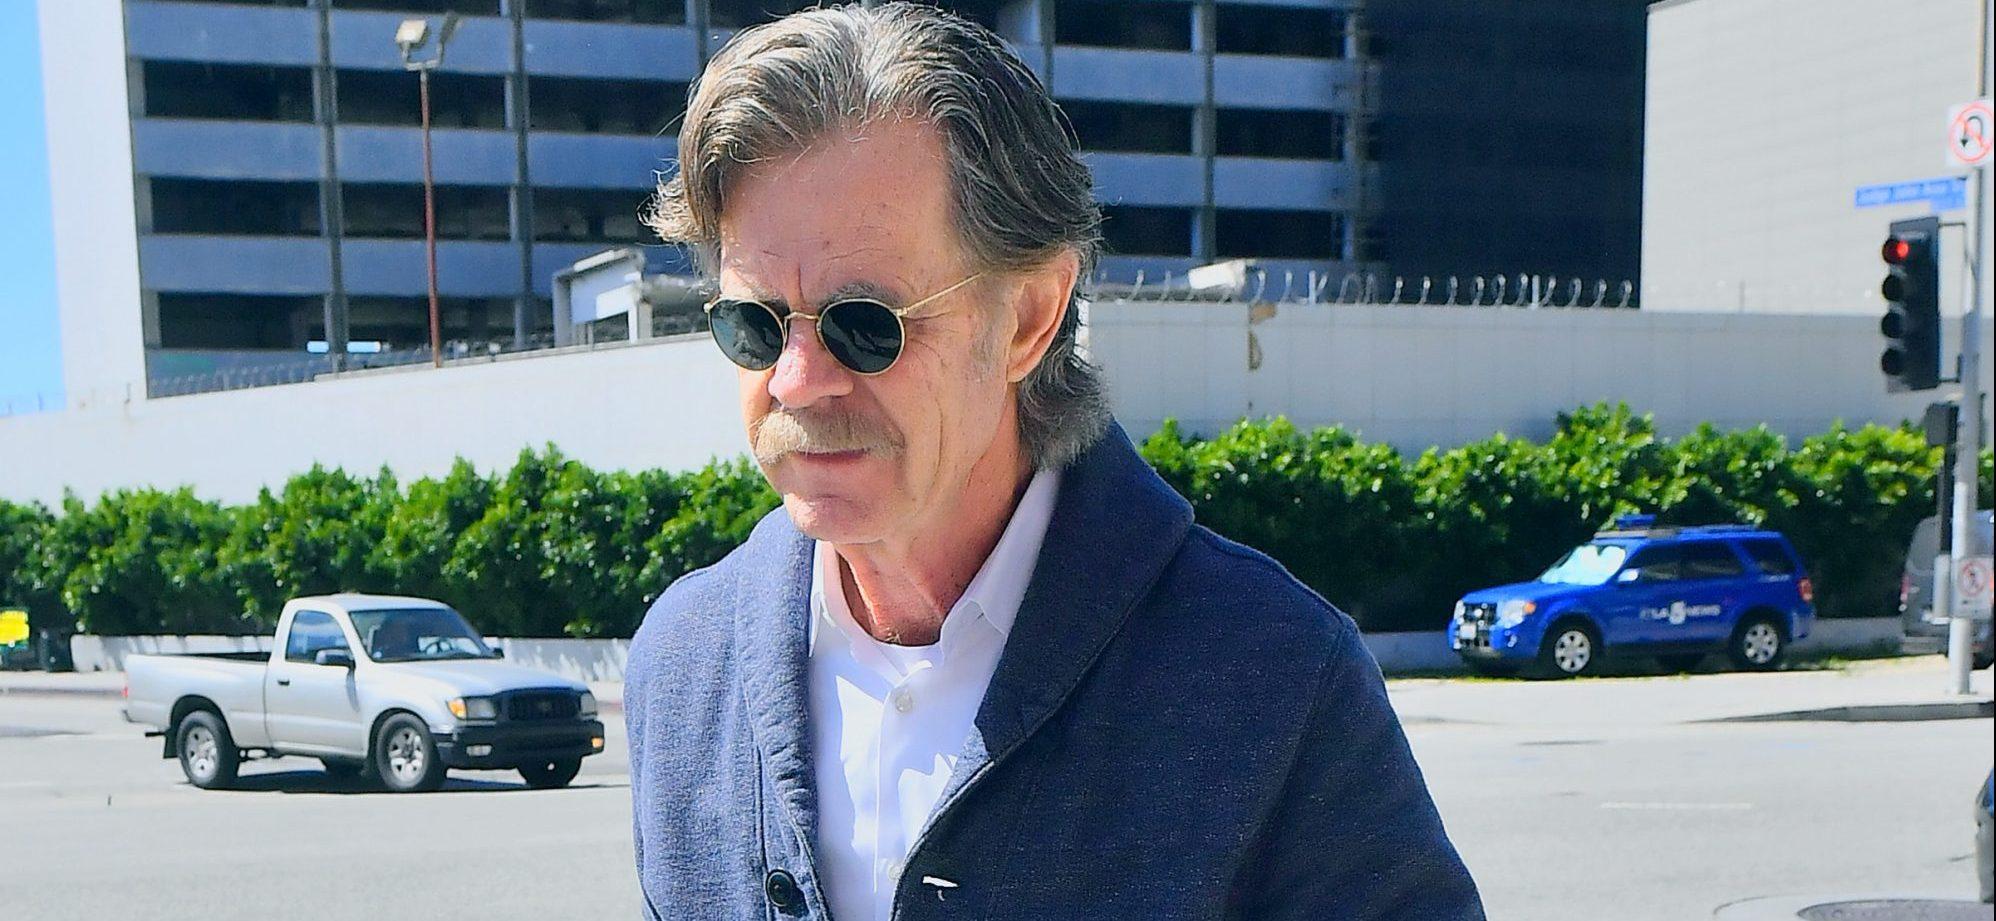 William H Macy Macy arriving at the Federal detention center in Los Angeles where Felicity Huffman is currently being held with others over a alleged college cheating scam